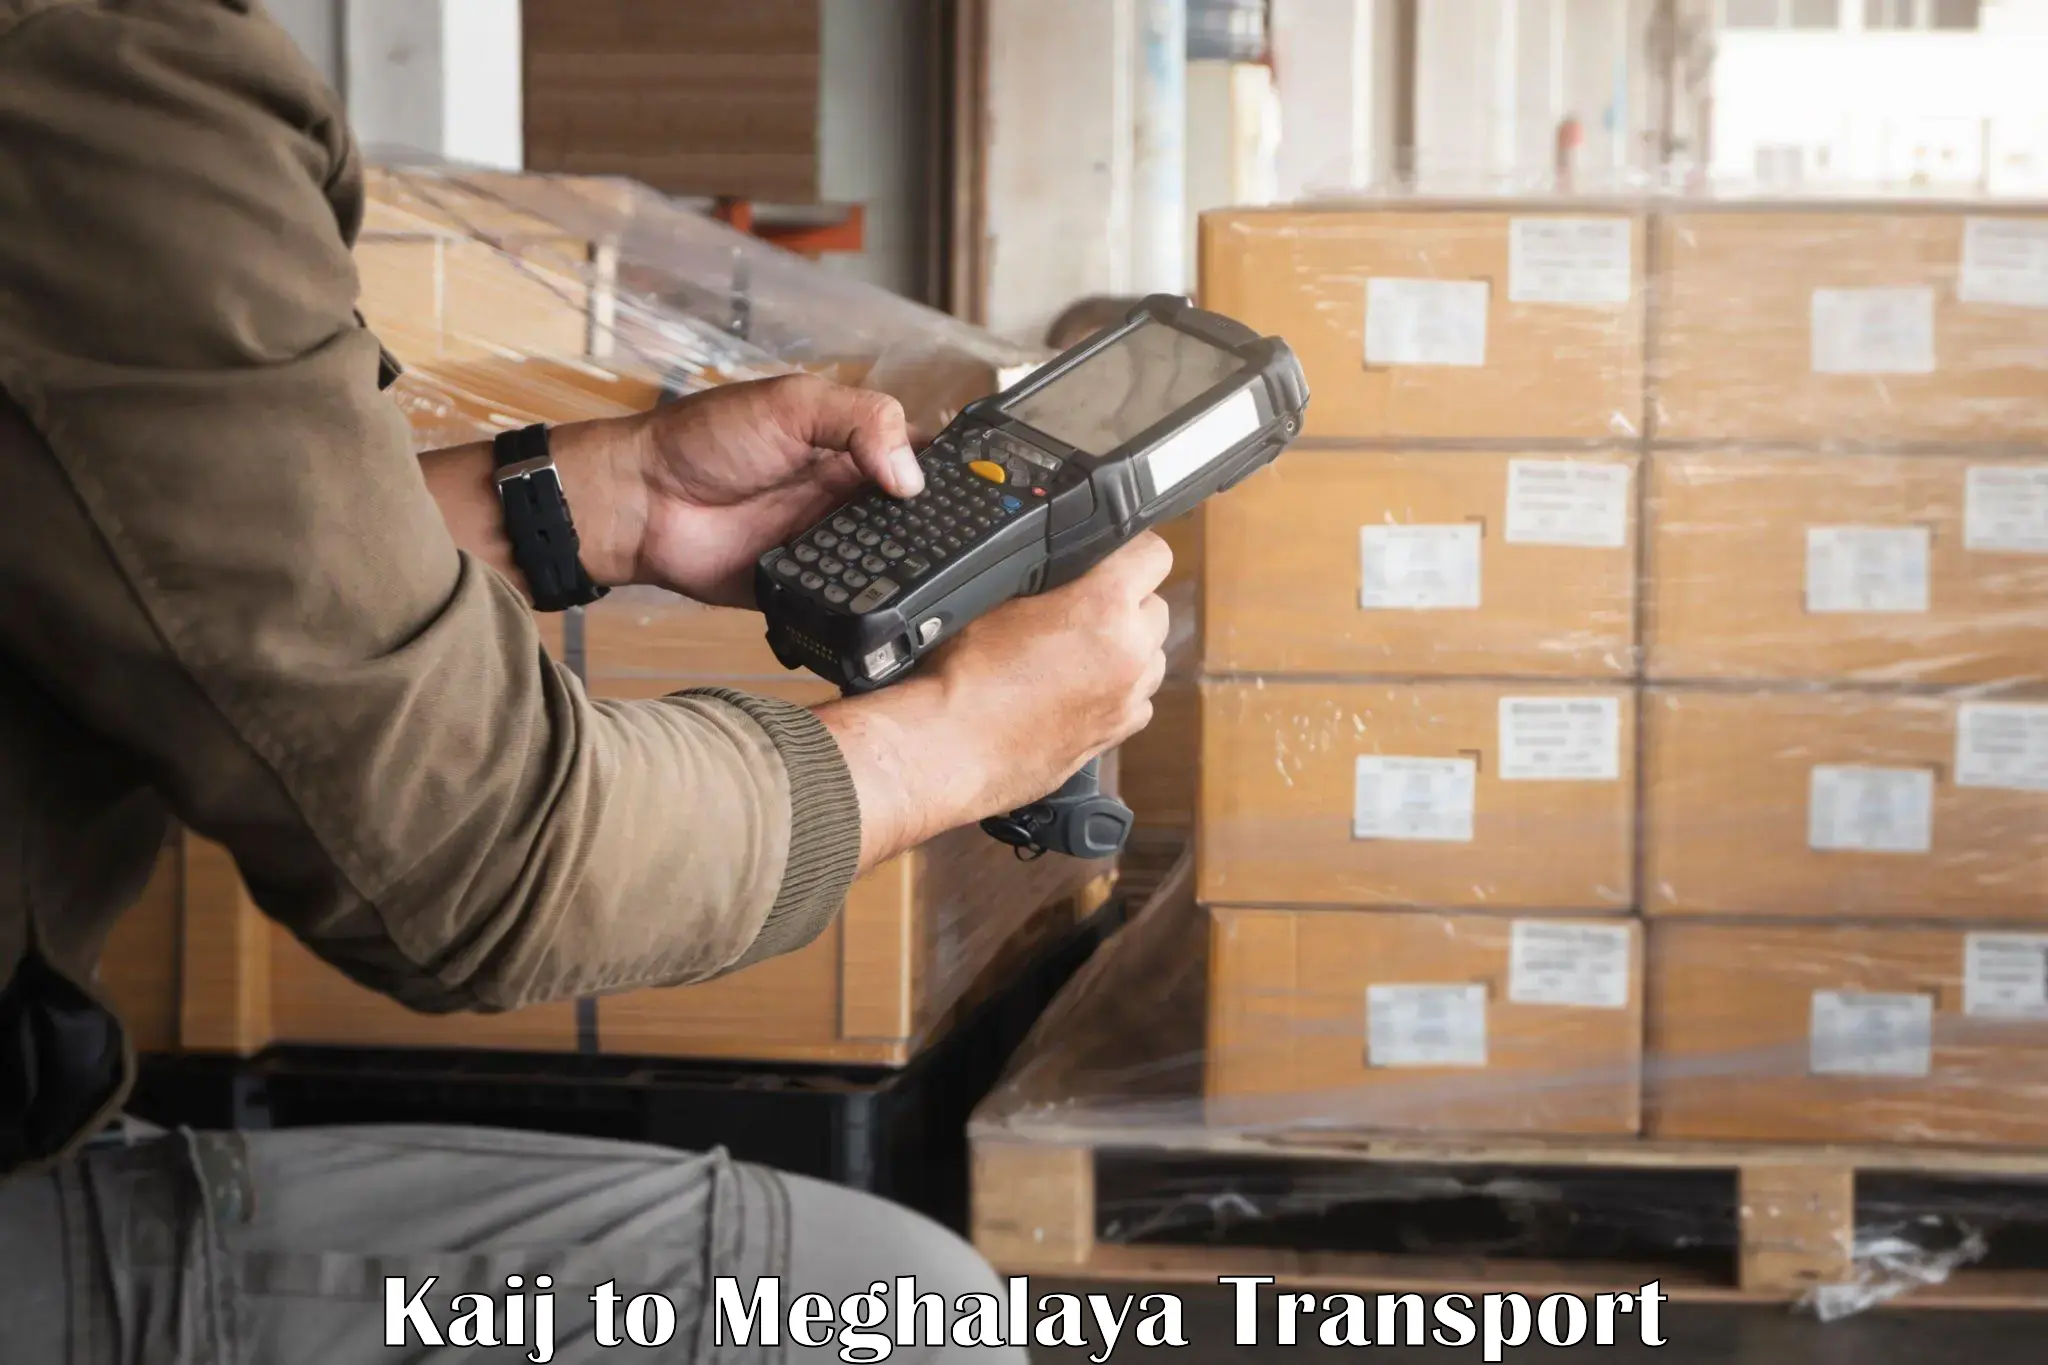 Air freight transport services in Kaij to Meghalaya